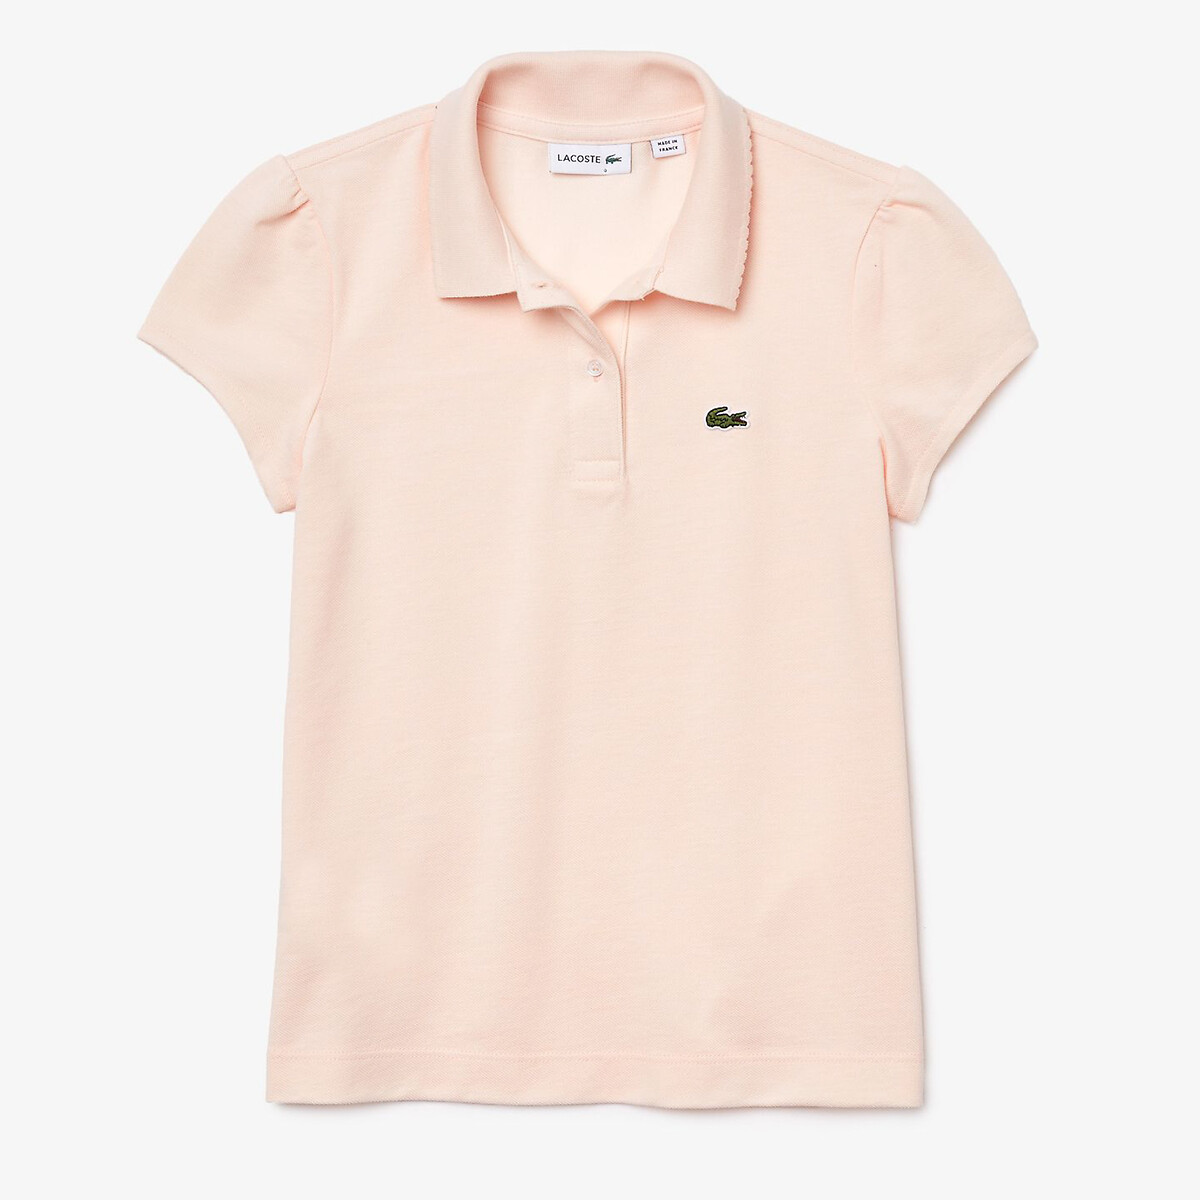 embroidered logo polo shirt in cotton with short sleeves, 6-12 years